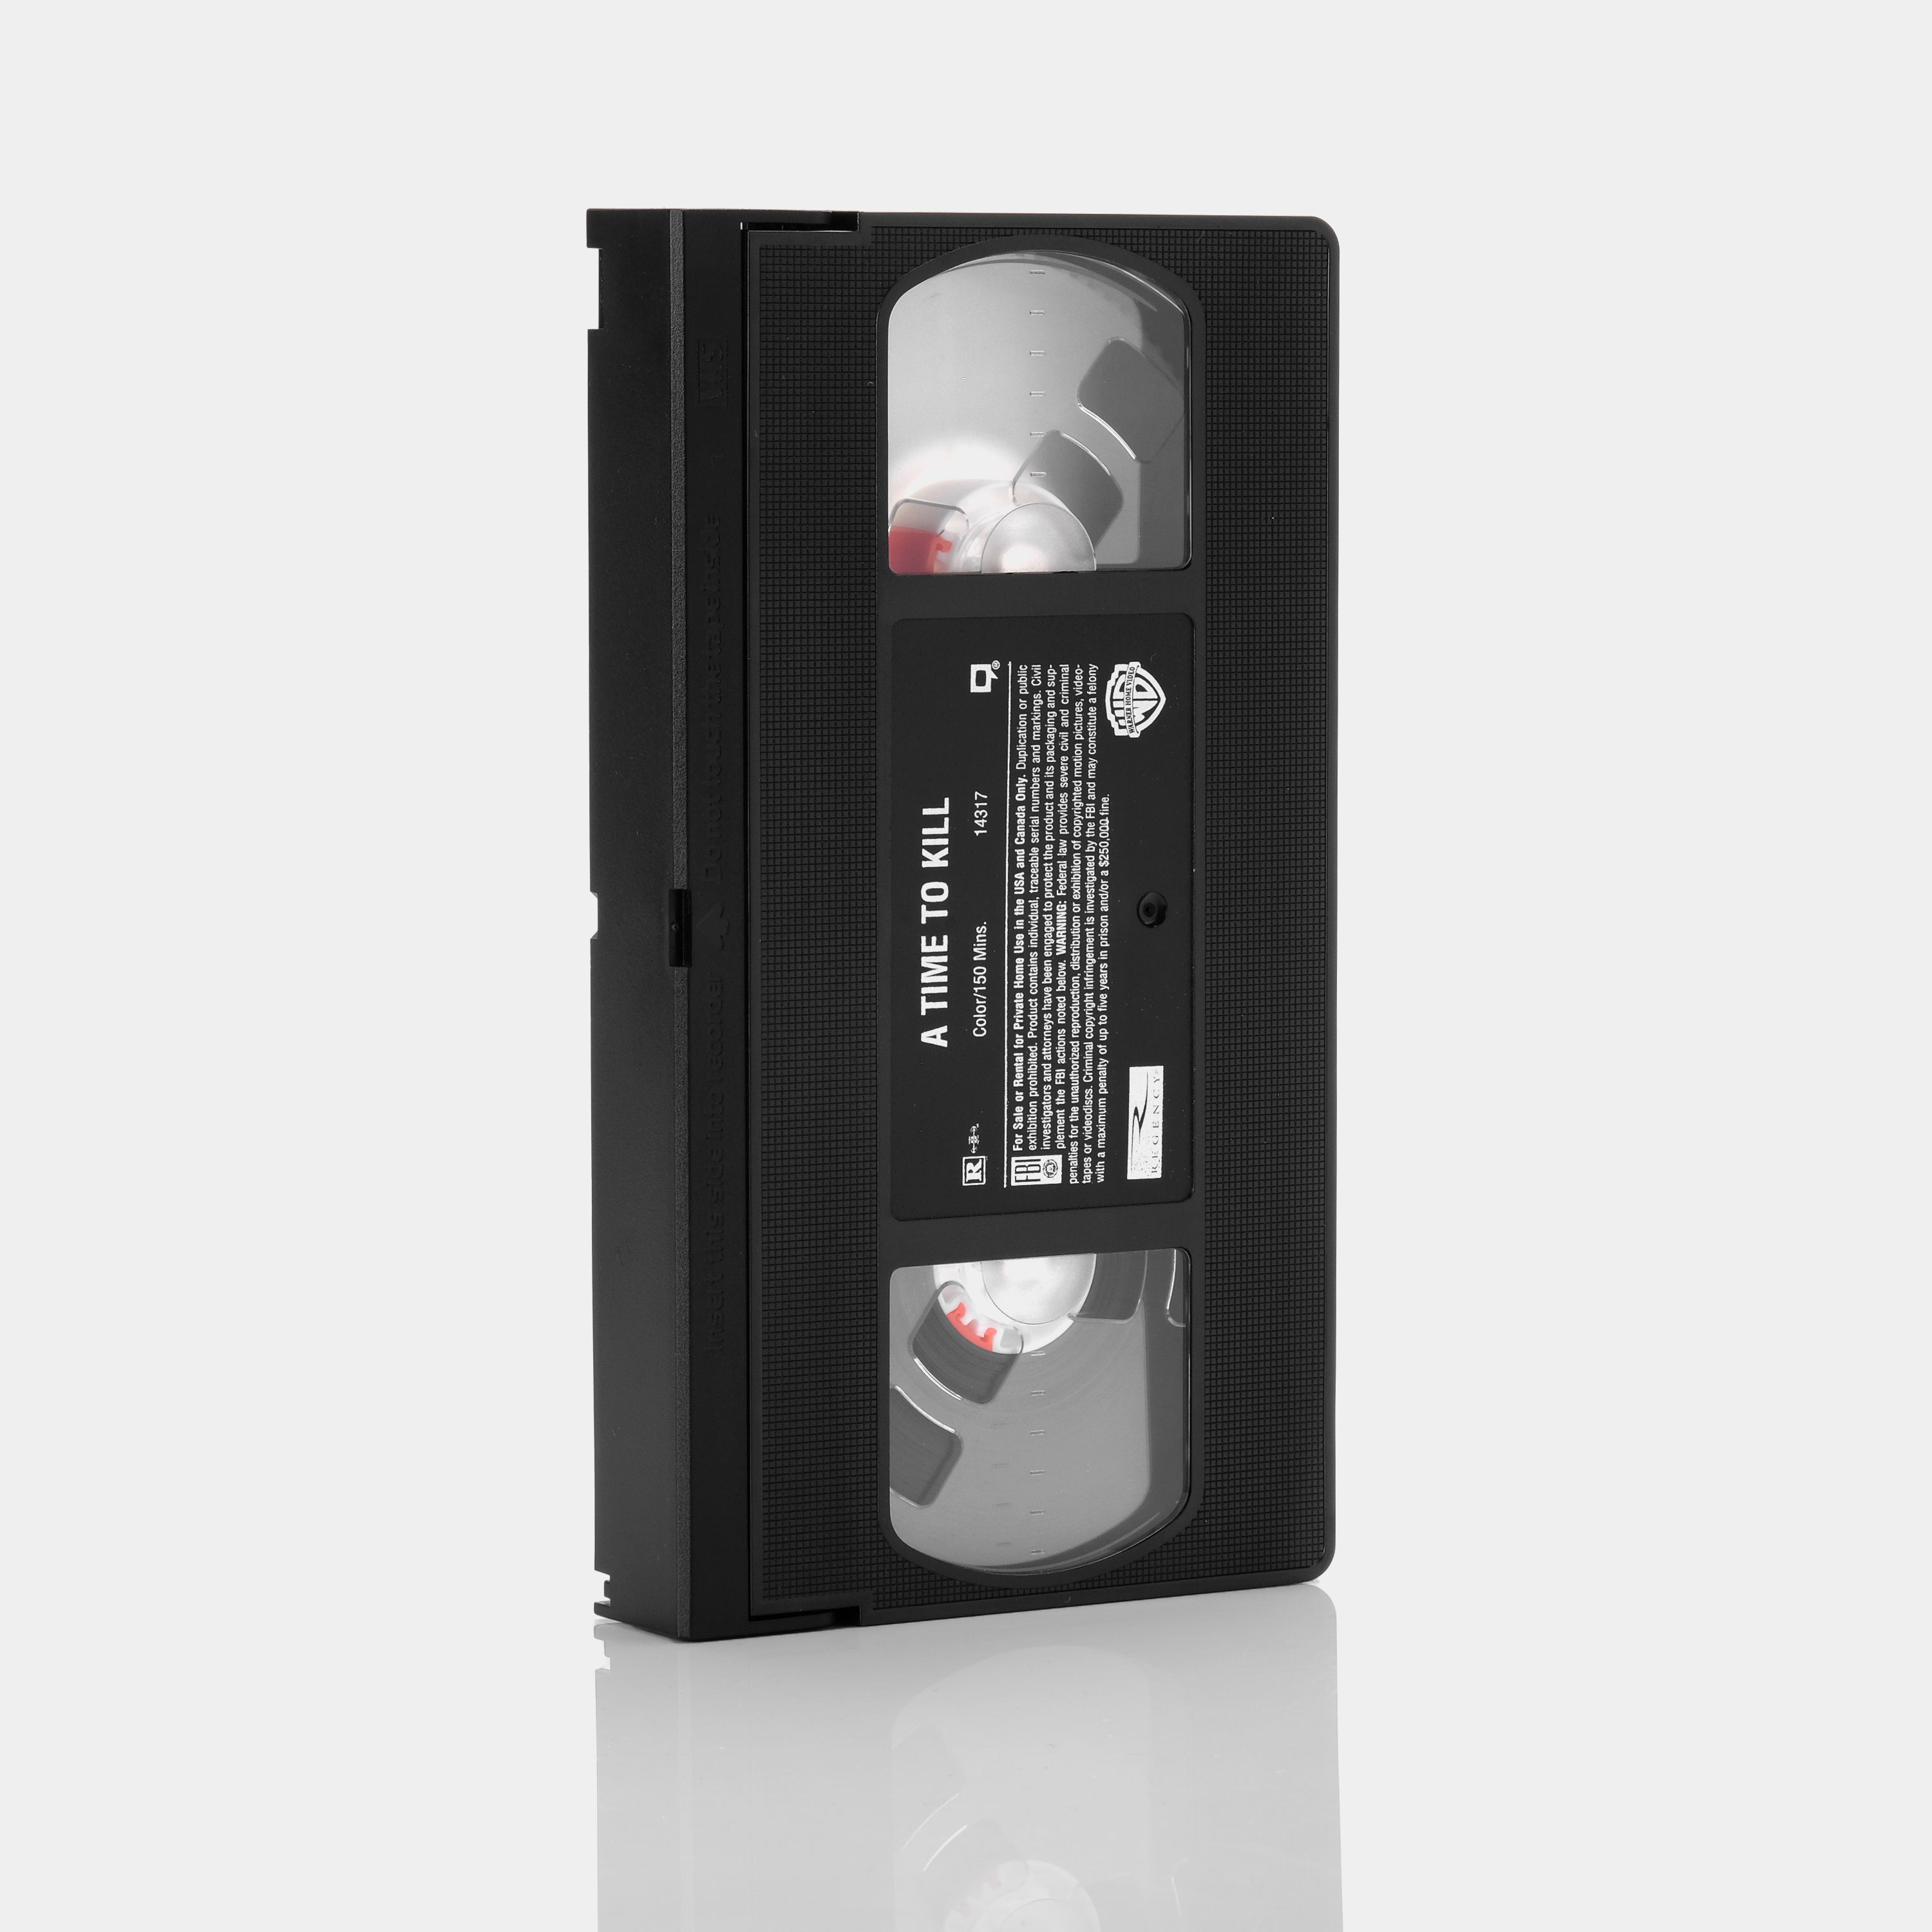 A Time to Kill VHS Tape